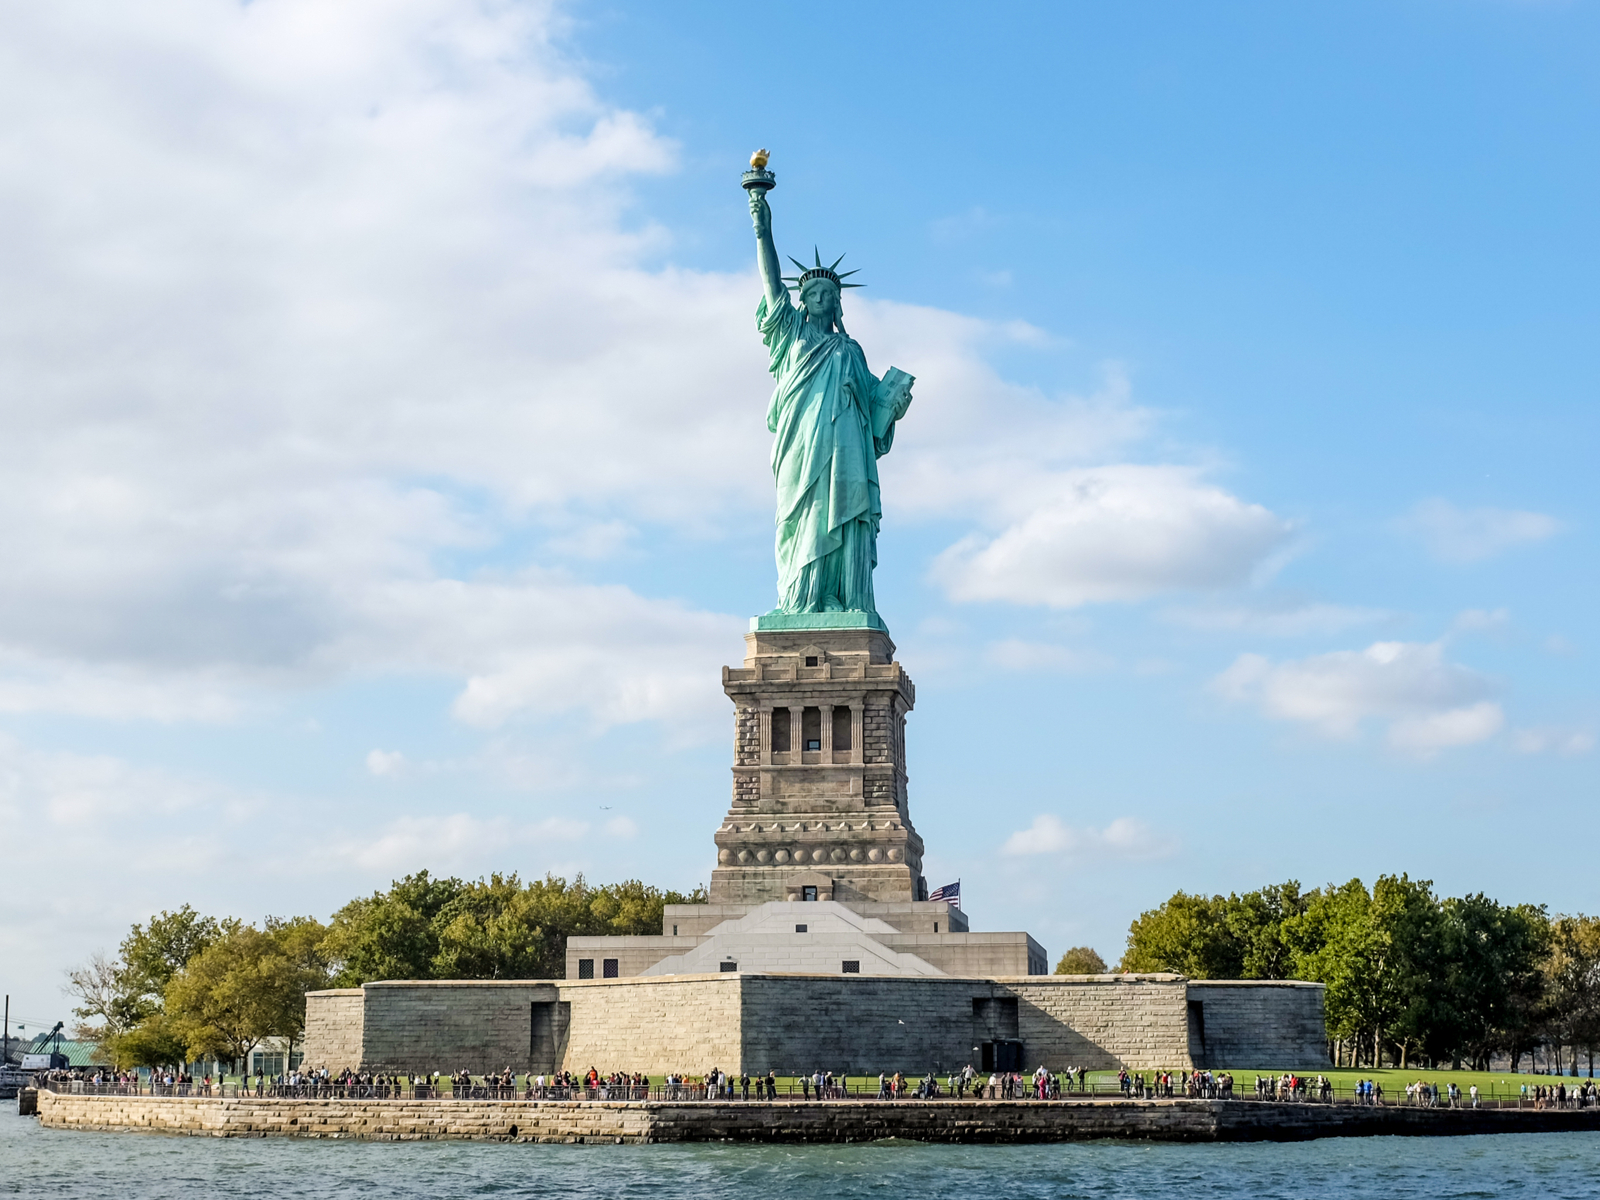 Image of the Statue of Liberty, one of the best things to do in New York City